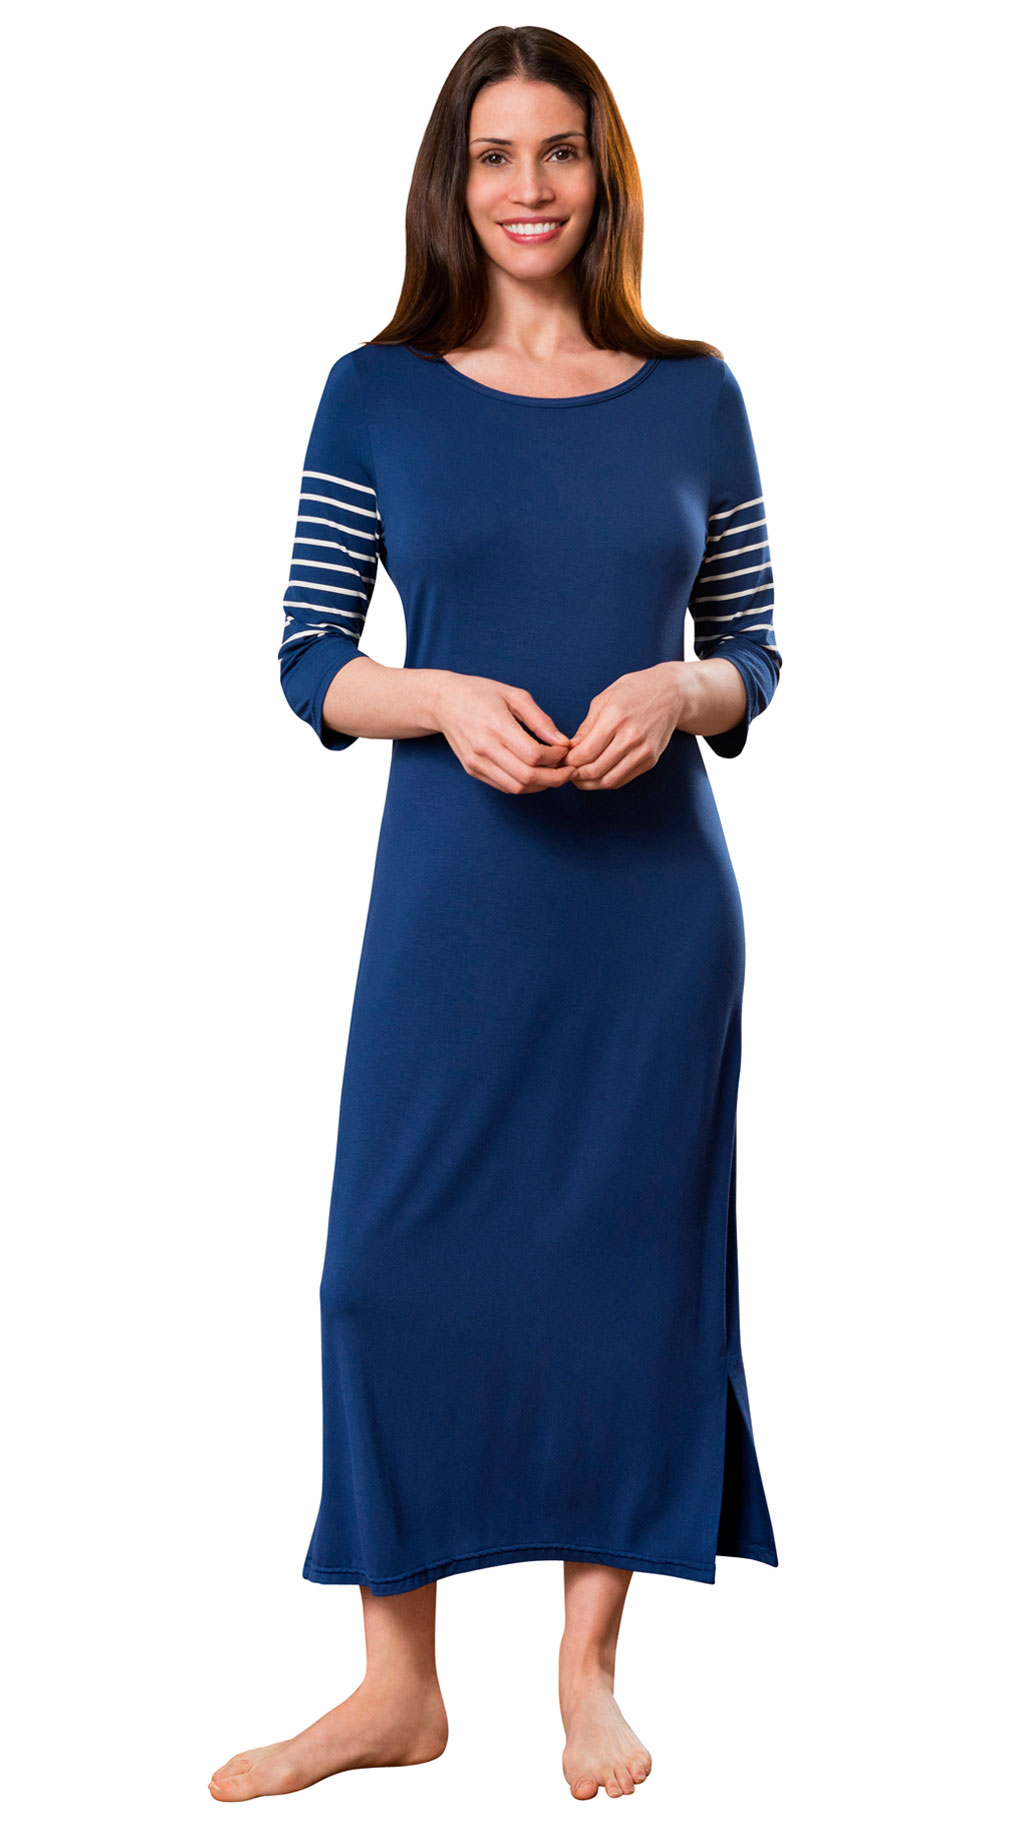 long sleeve nightgown with blue stripes